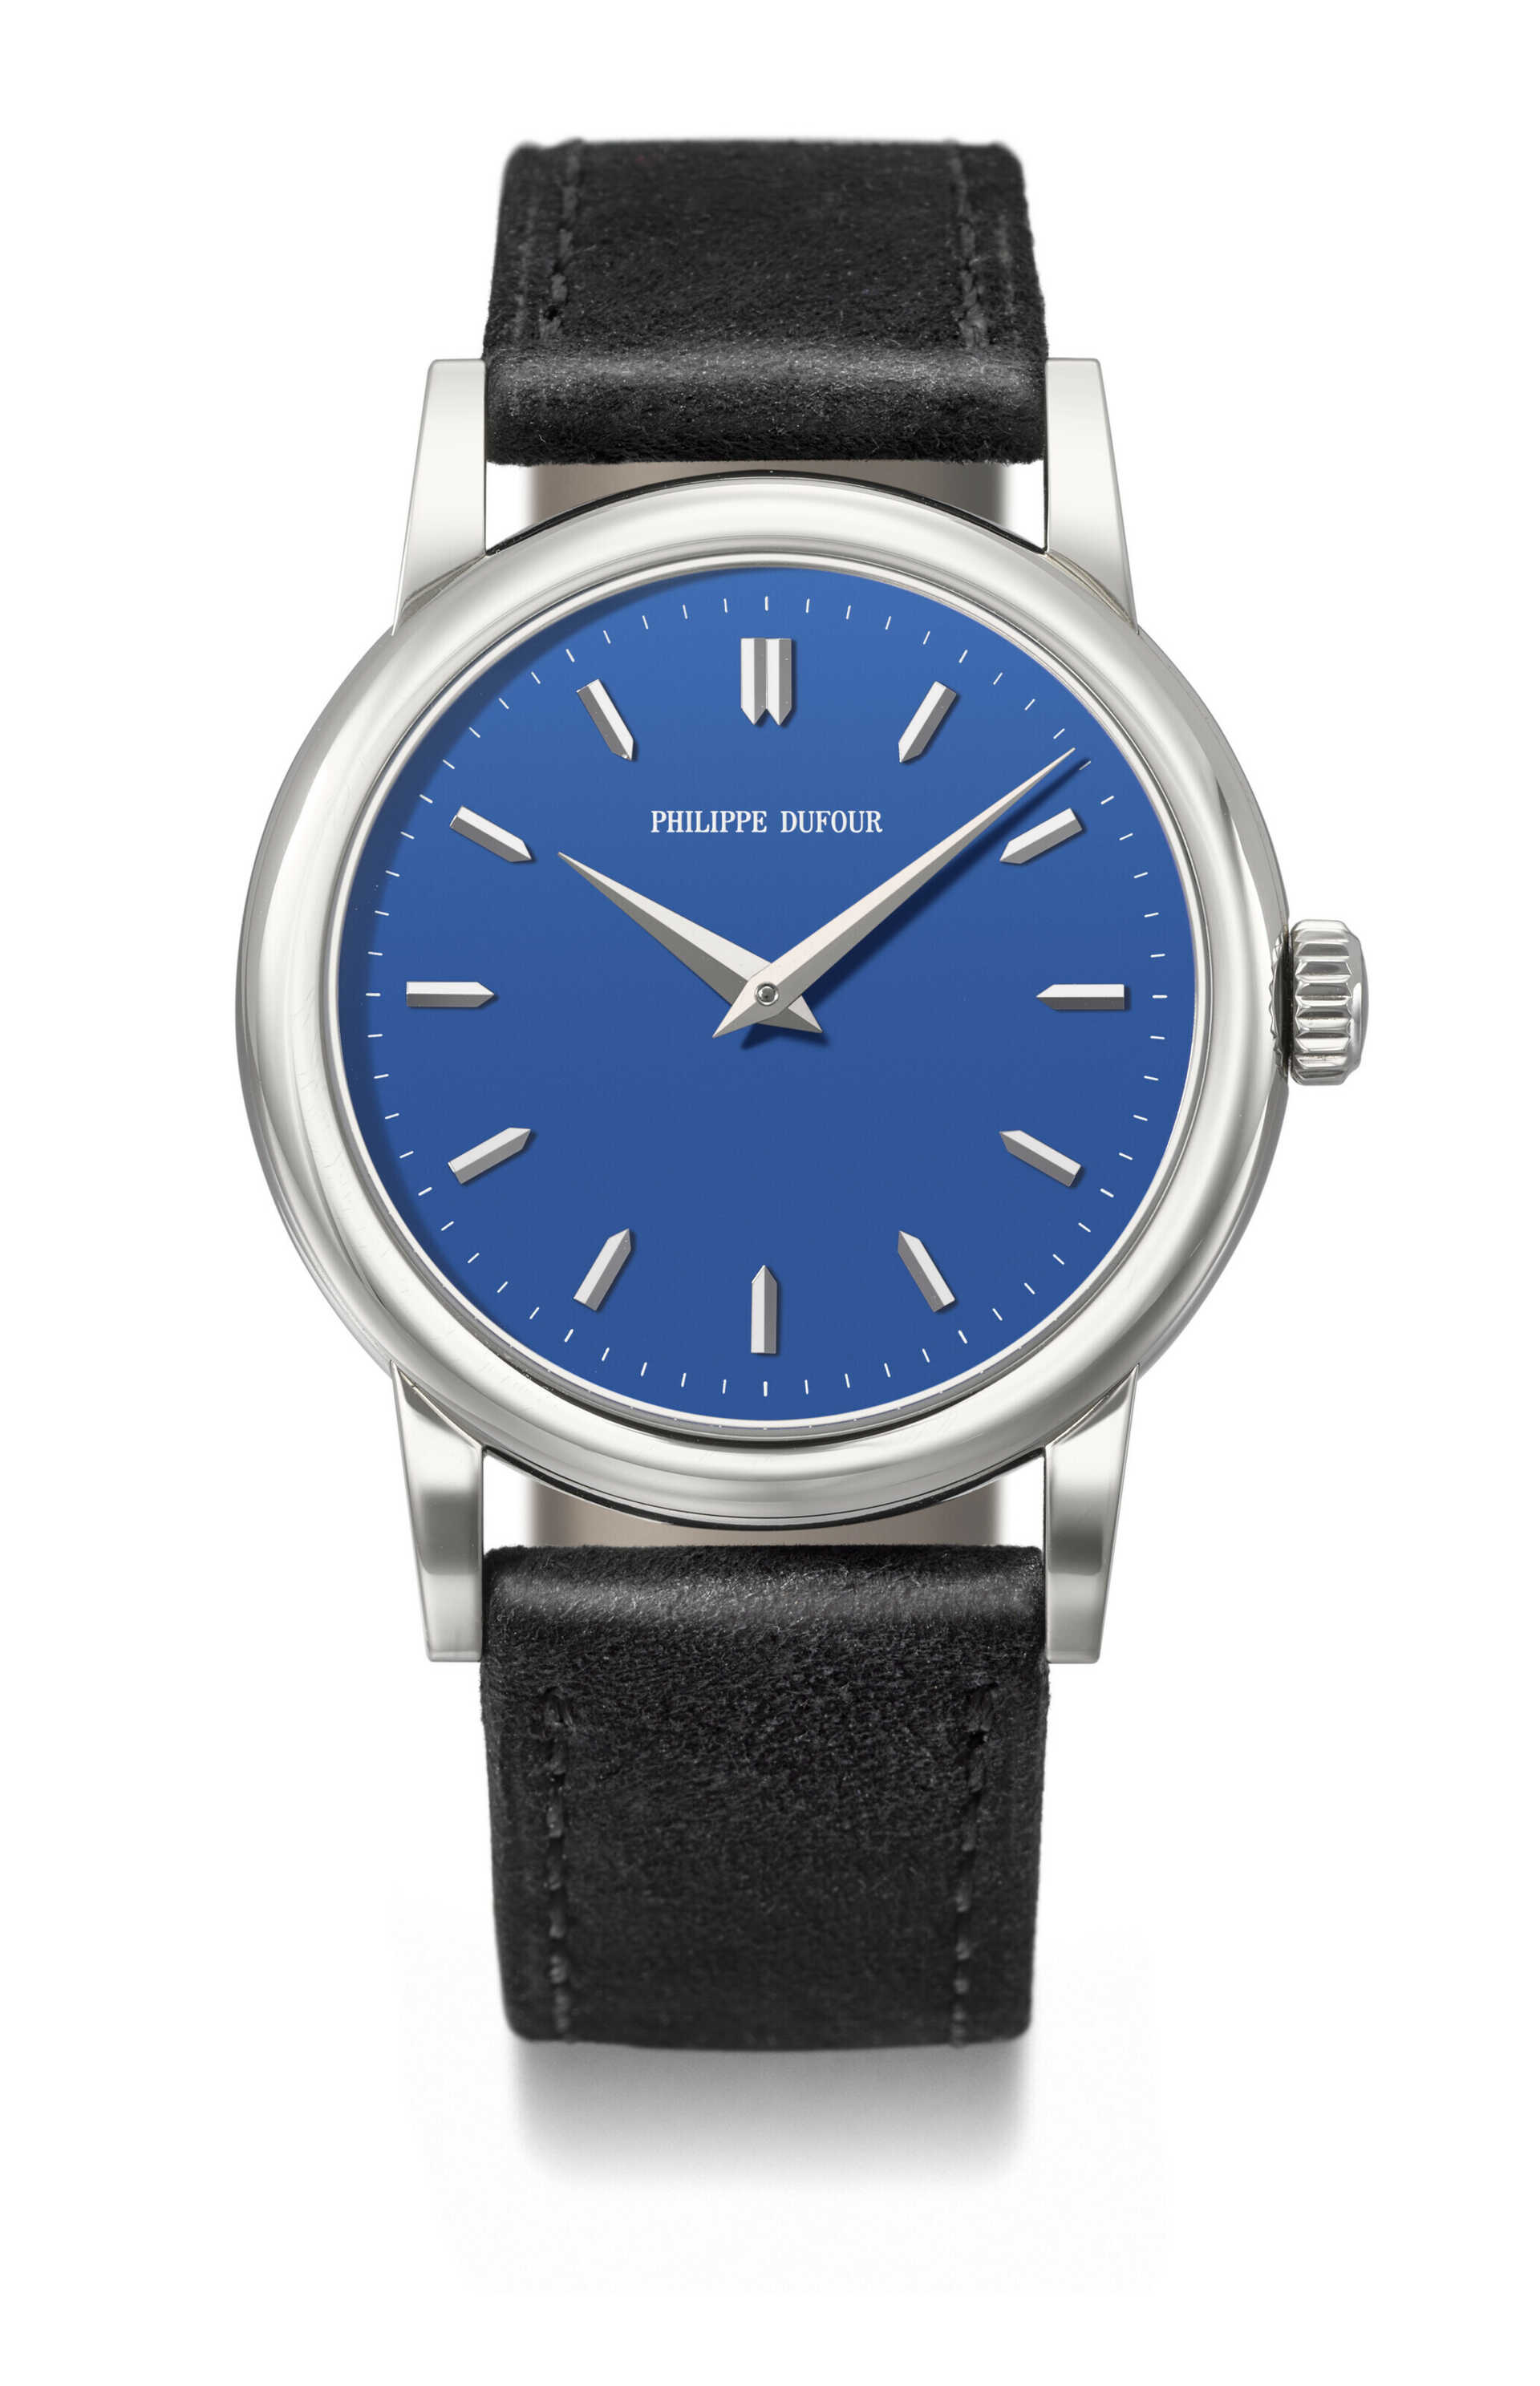 PHILIPPE DUFOUR. A UNIQUE, EXCEEDINGLY FINE AND LARGE, HIGHLY IMPORTANT STAINLESS STEEL WRISTWATCH WITH 38MM CASE AND ROYAL BLUE DIAL WITHOUT SMALL SECONDS